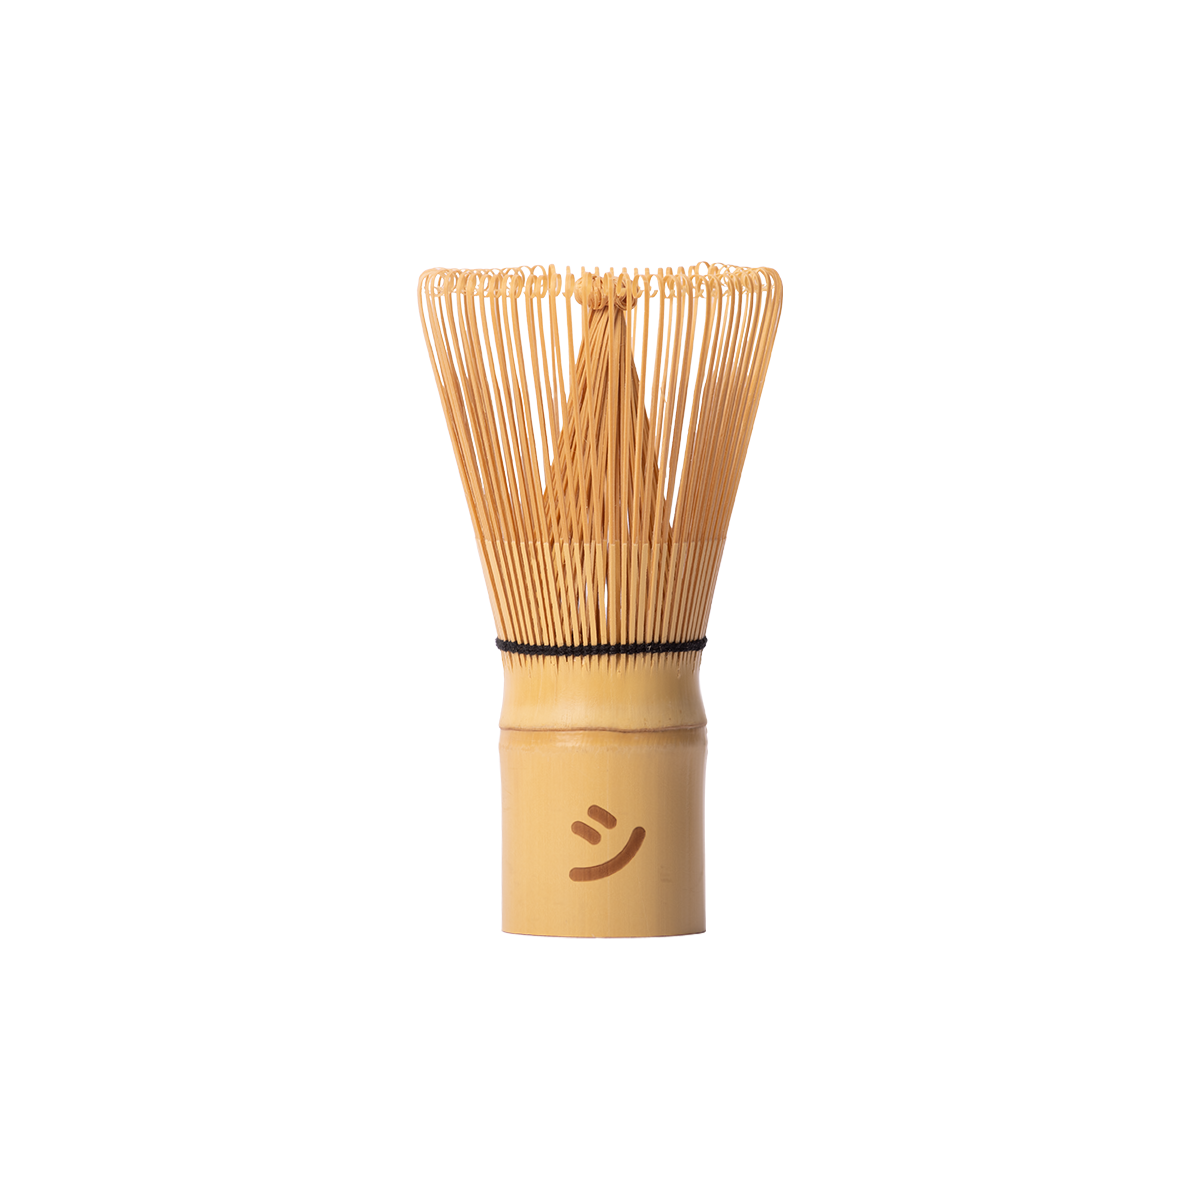 The normale Matchasome Matcha Whisk